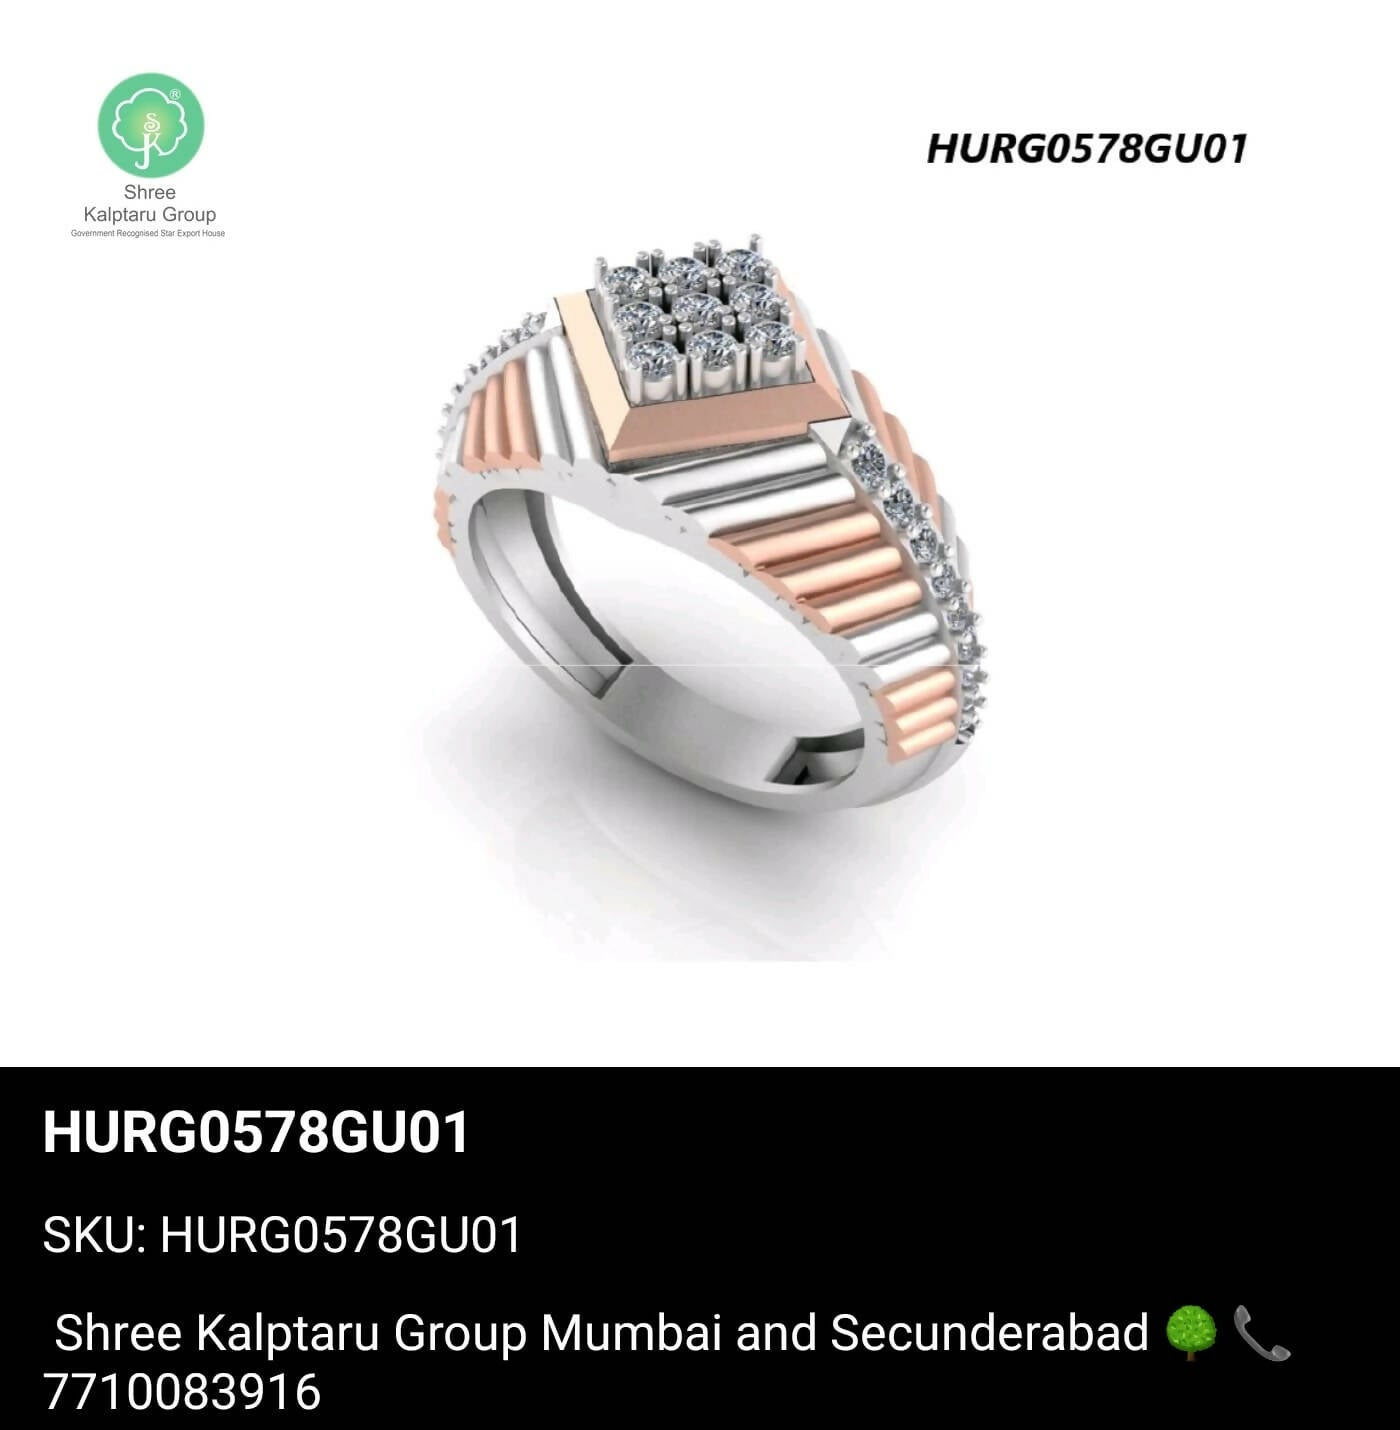 meri ring free size for boys and girls